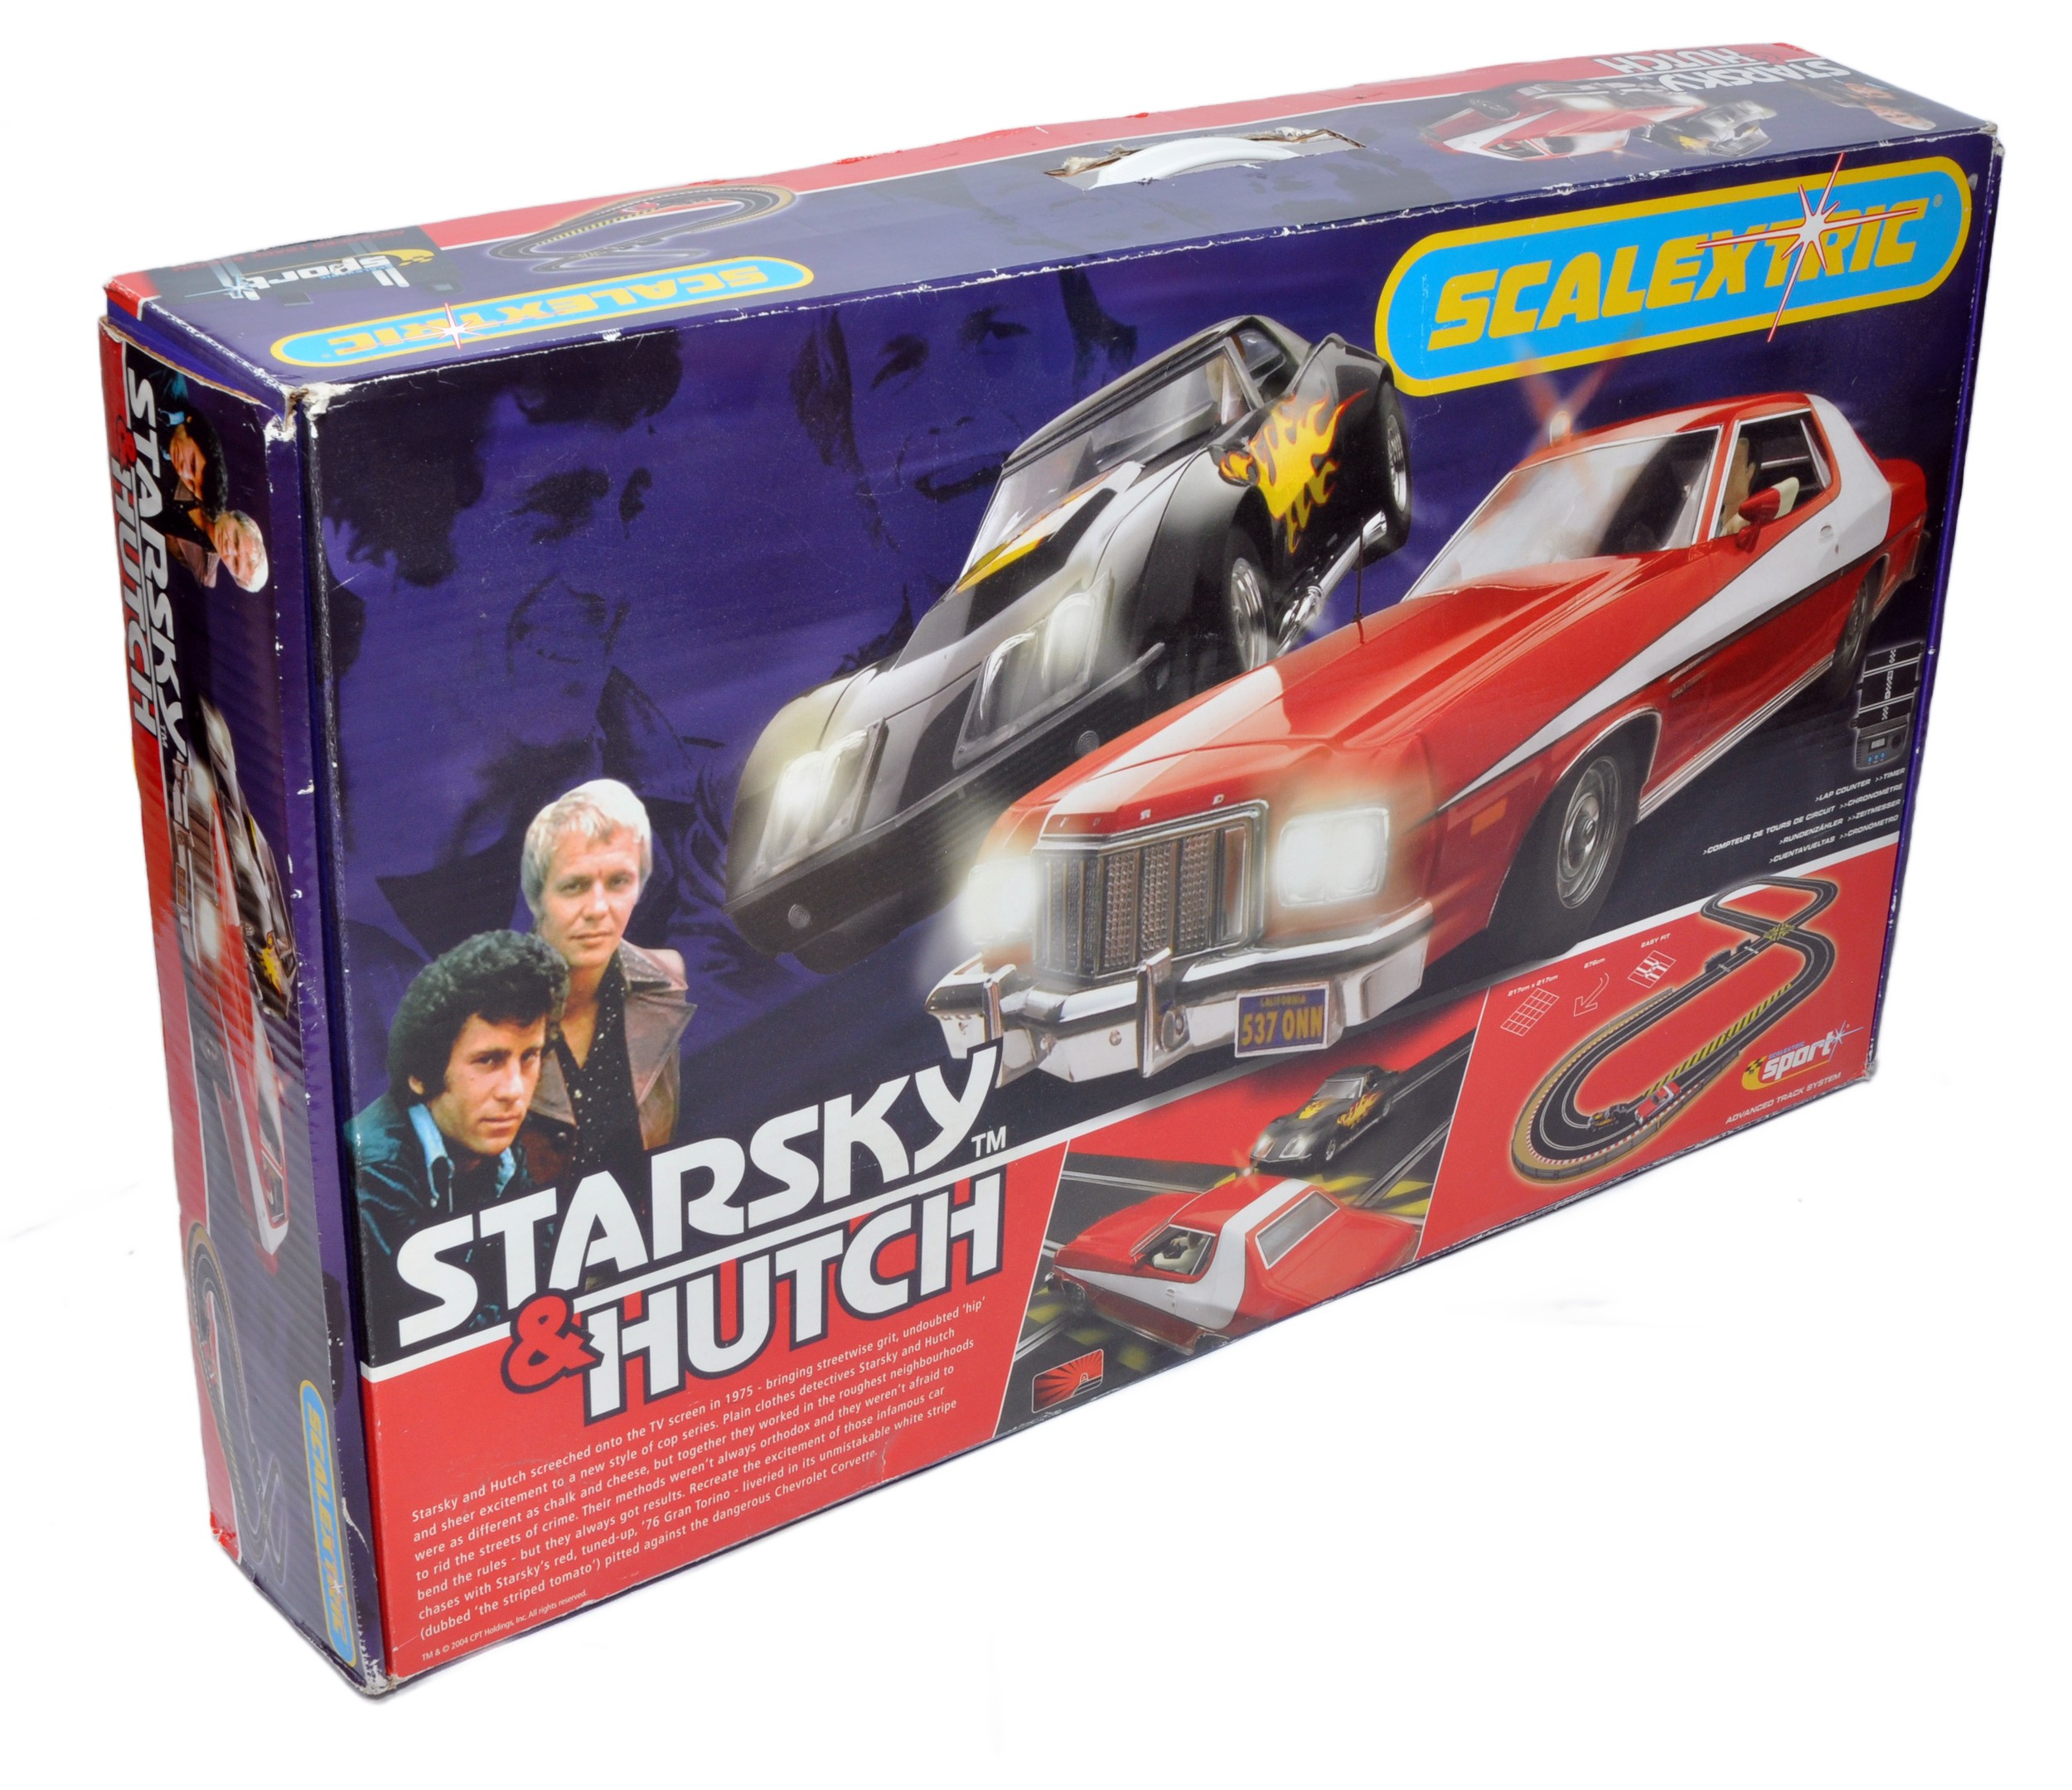 Scalextric Slot Car Set, Starsky and Hutch, looks to be complete with little sign of use.